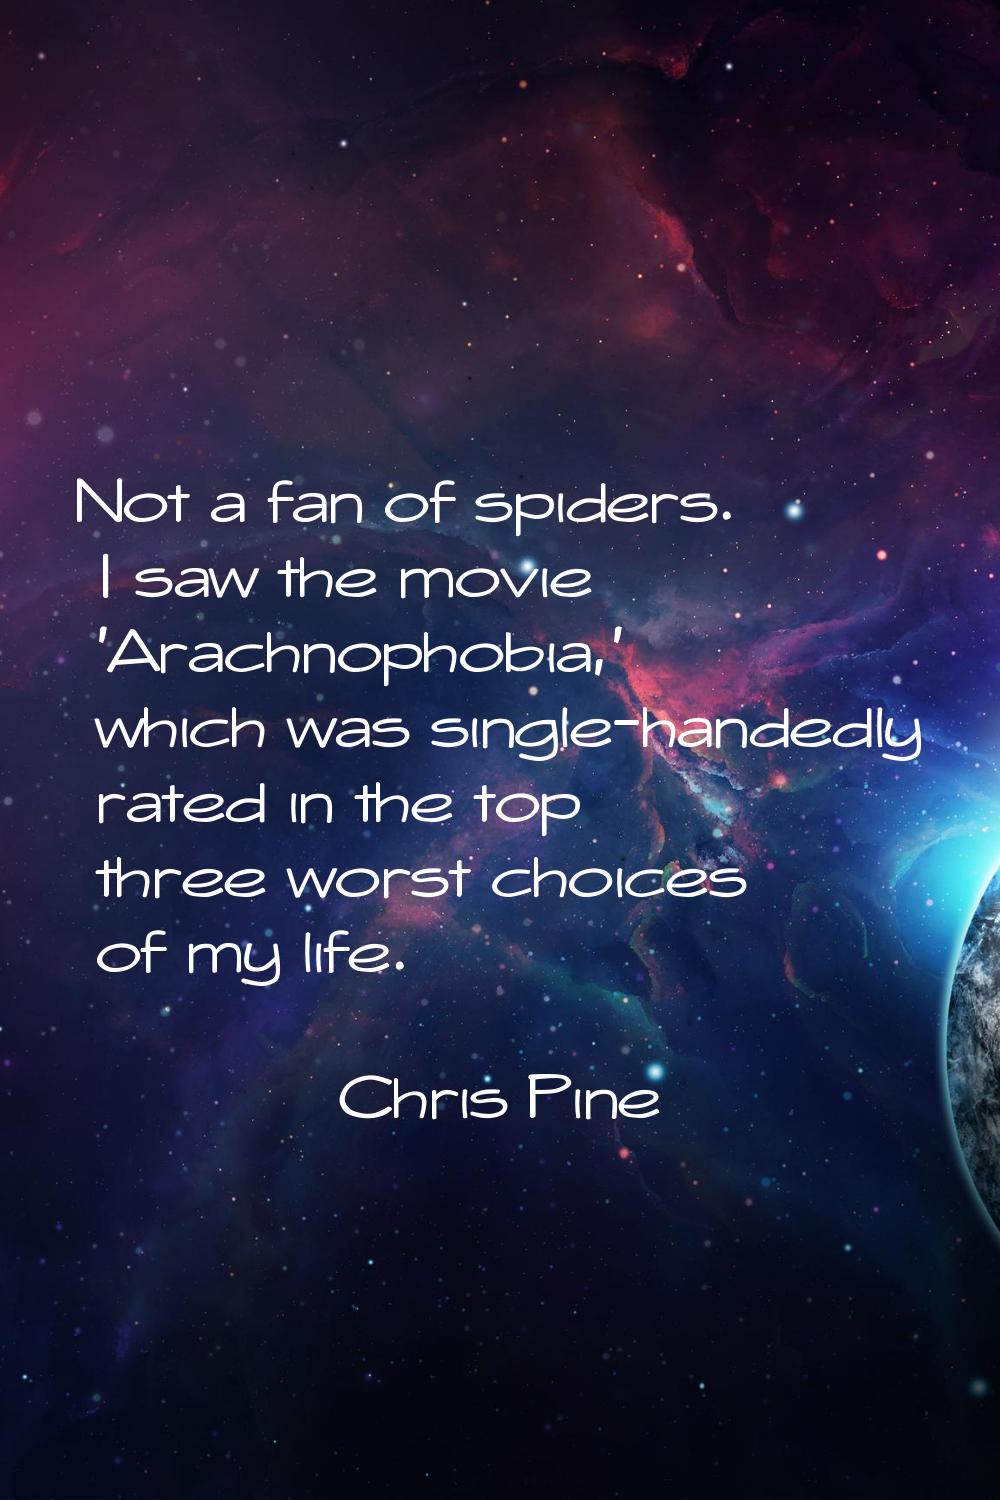 Not a fan of spiders. I saw the movie 'Arachnophobia,' which was single-handedly rated in the top t